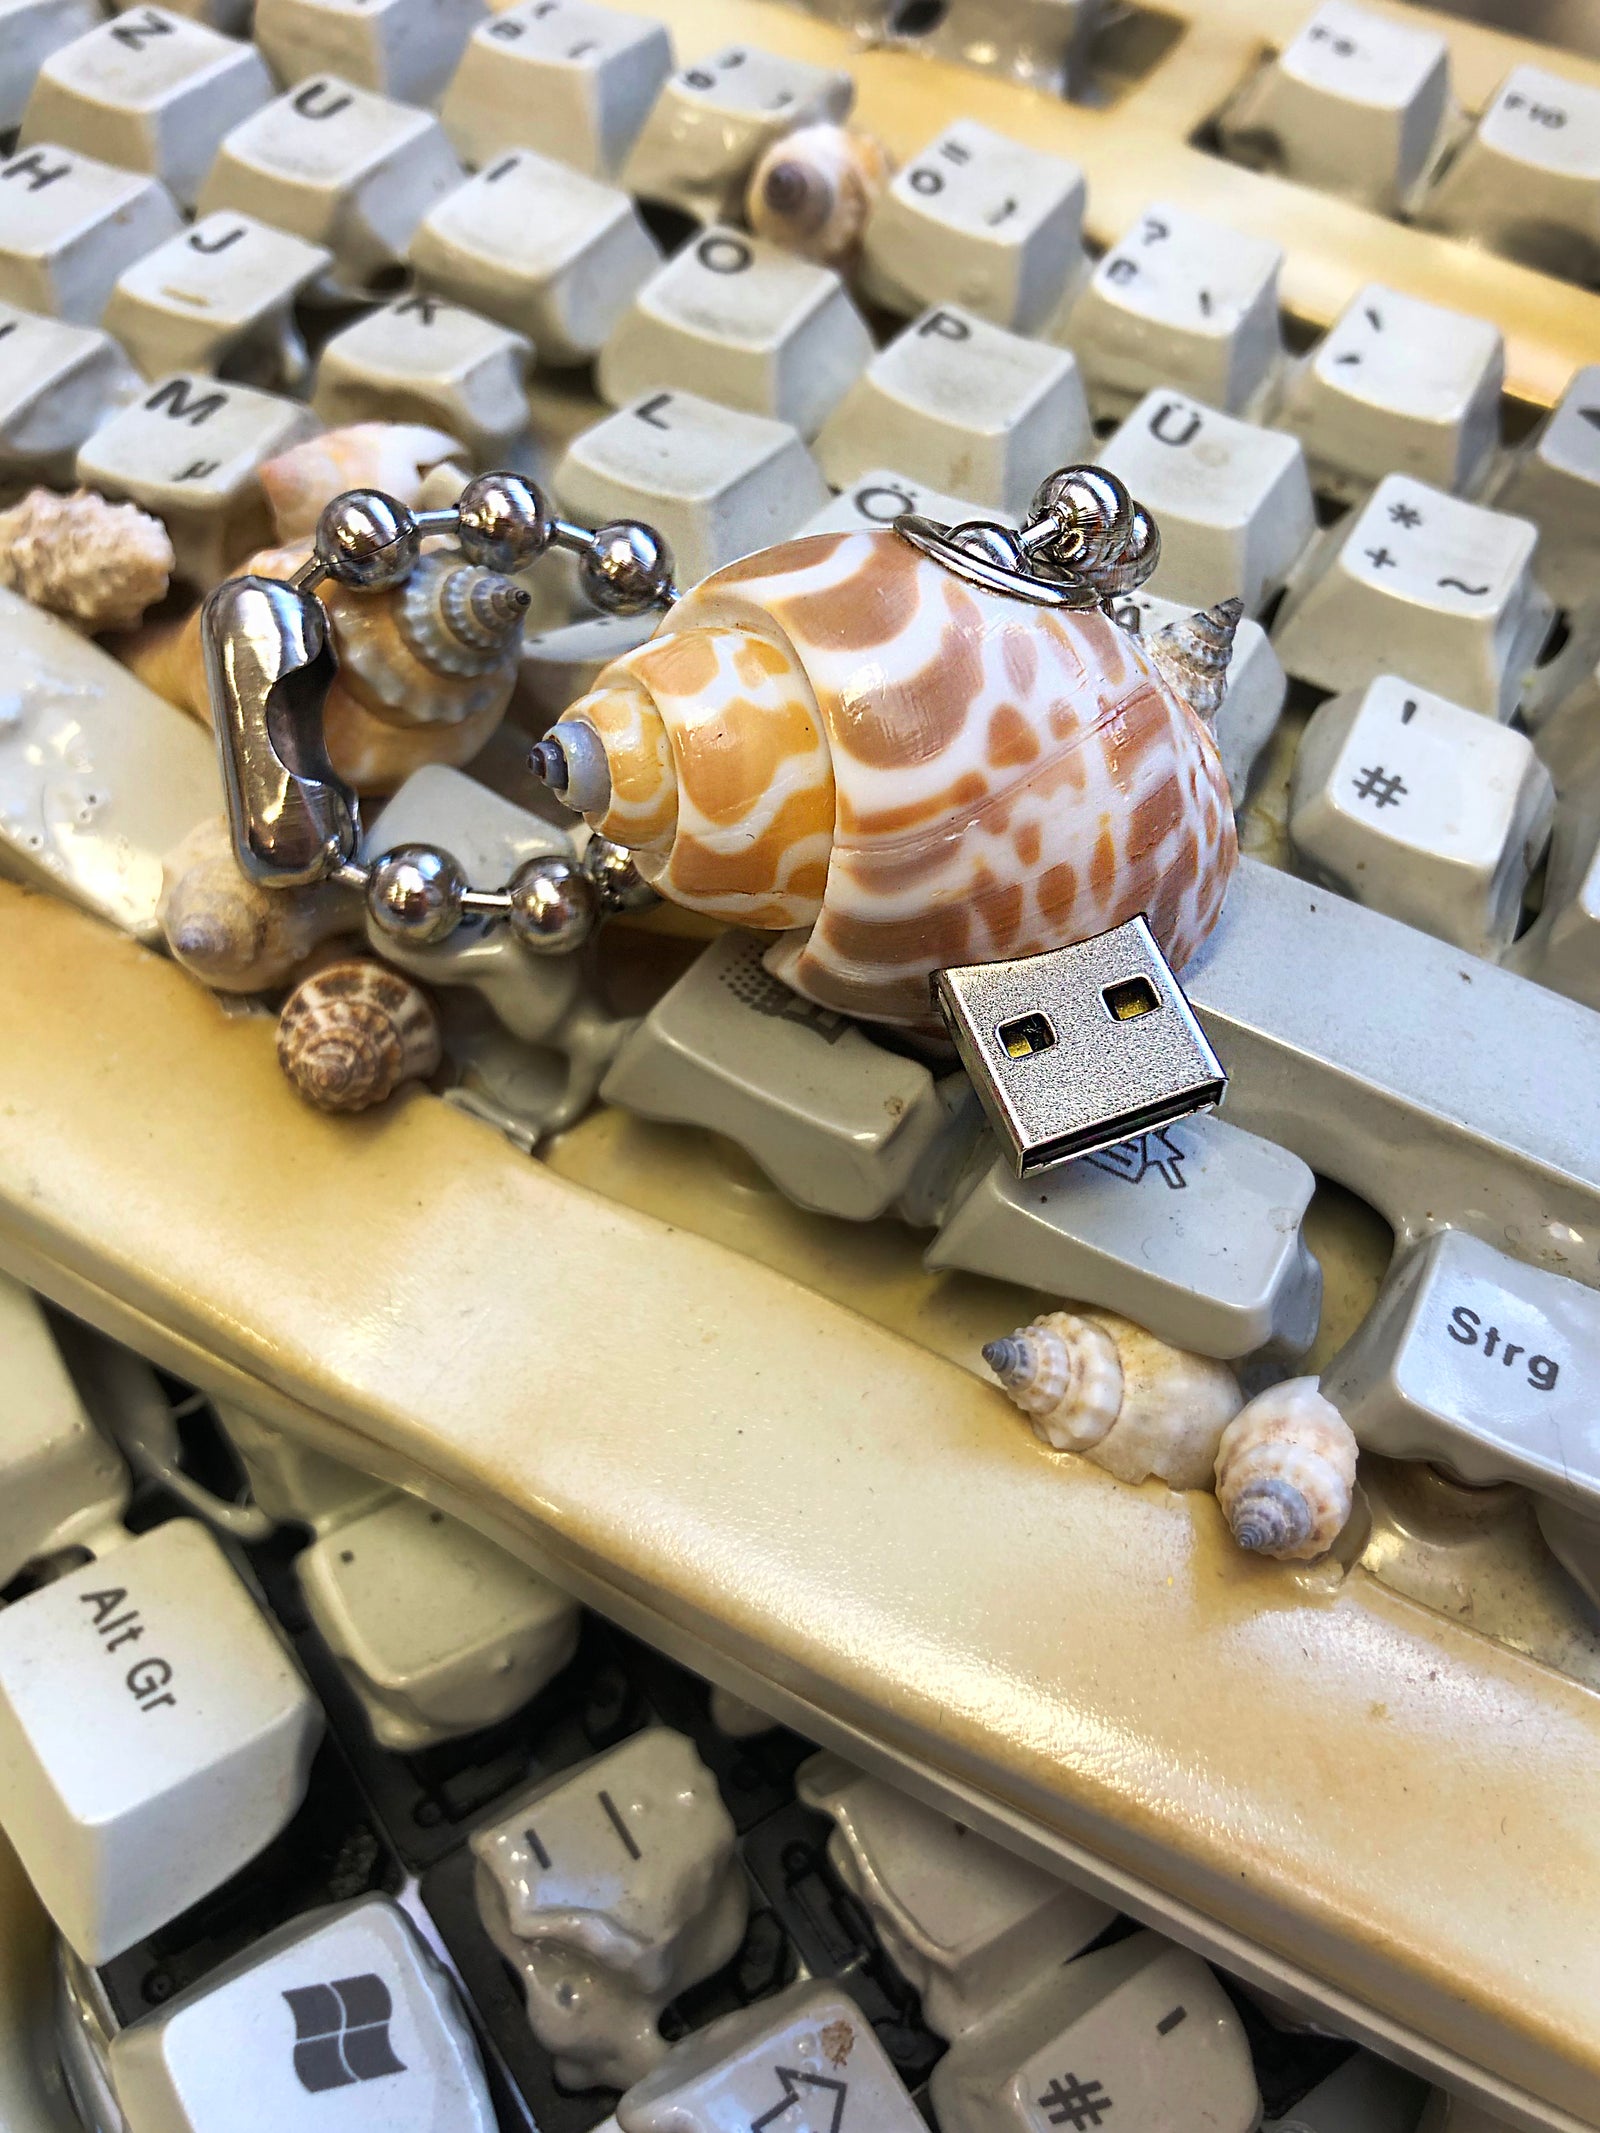 The USB Shell